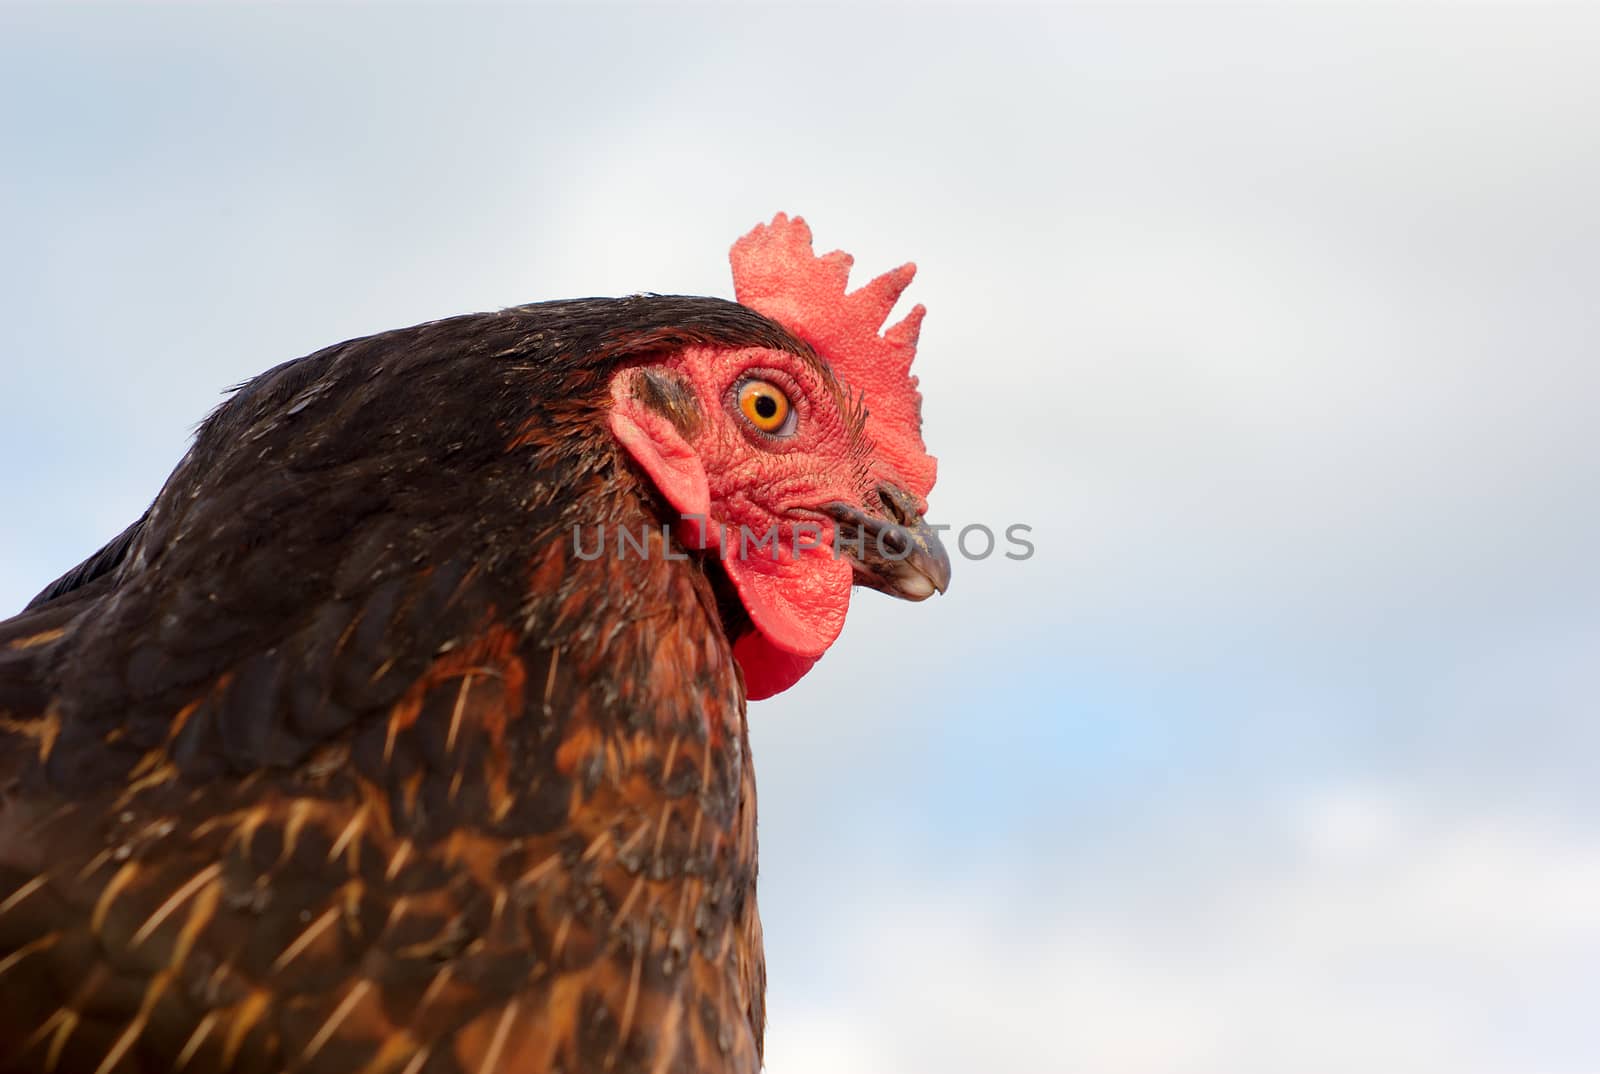 black hen chicken close-up portrait on gray cloudy sky by jacquesdurocher